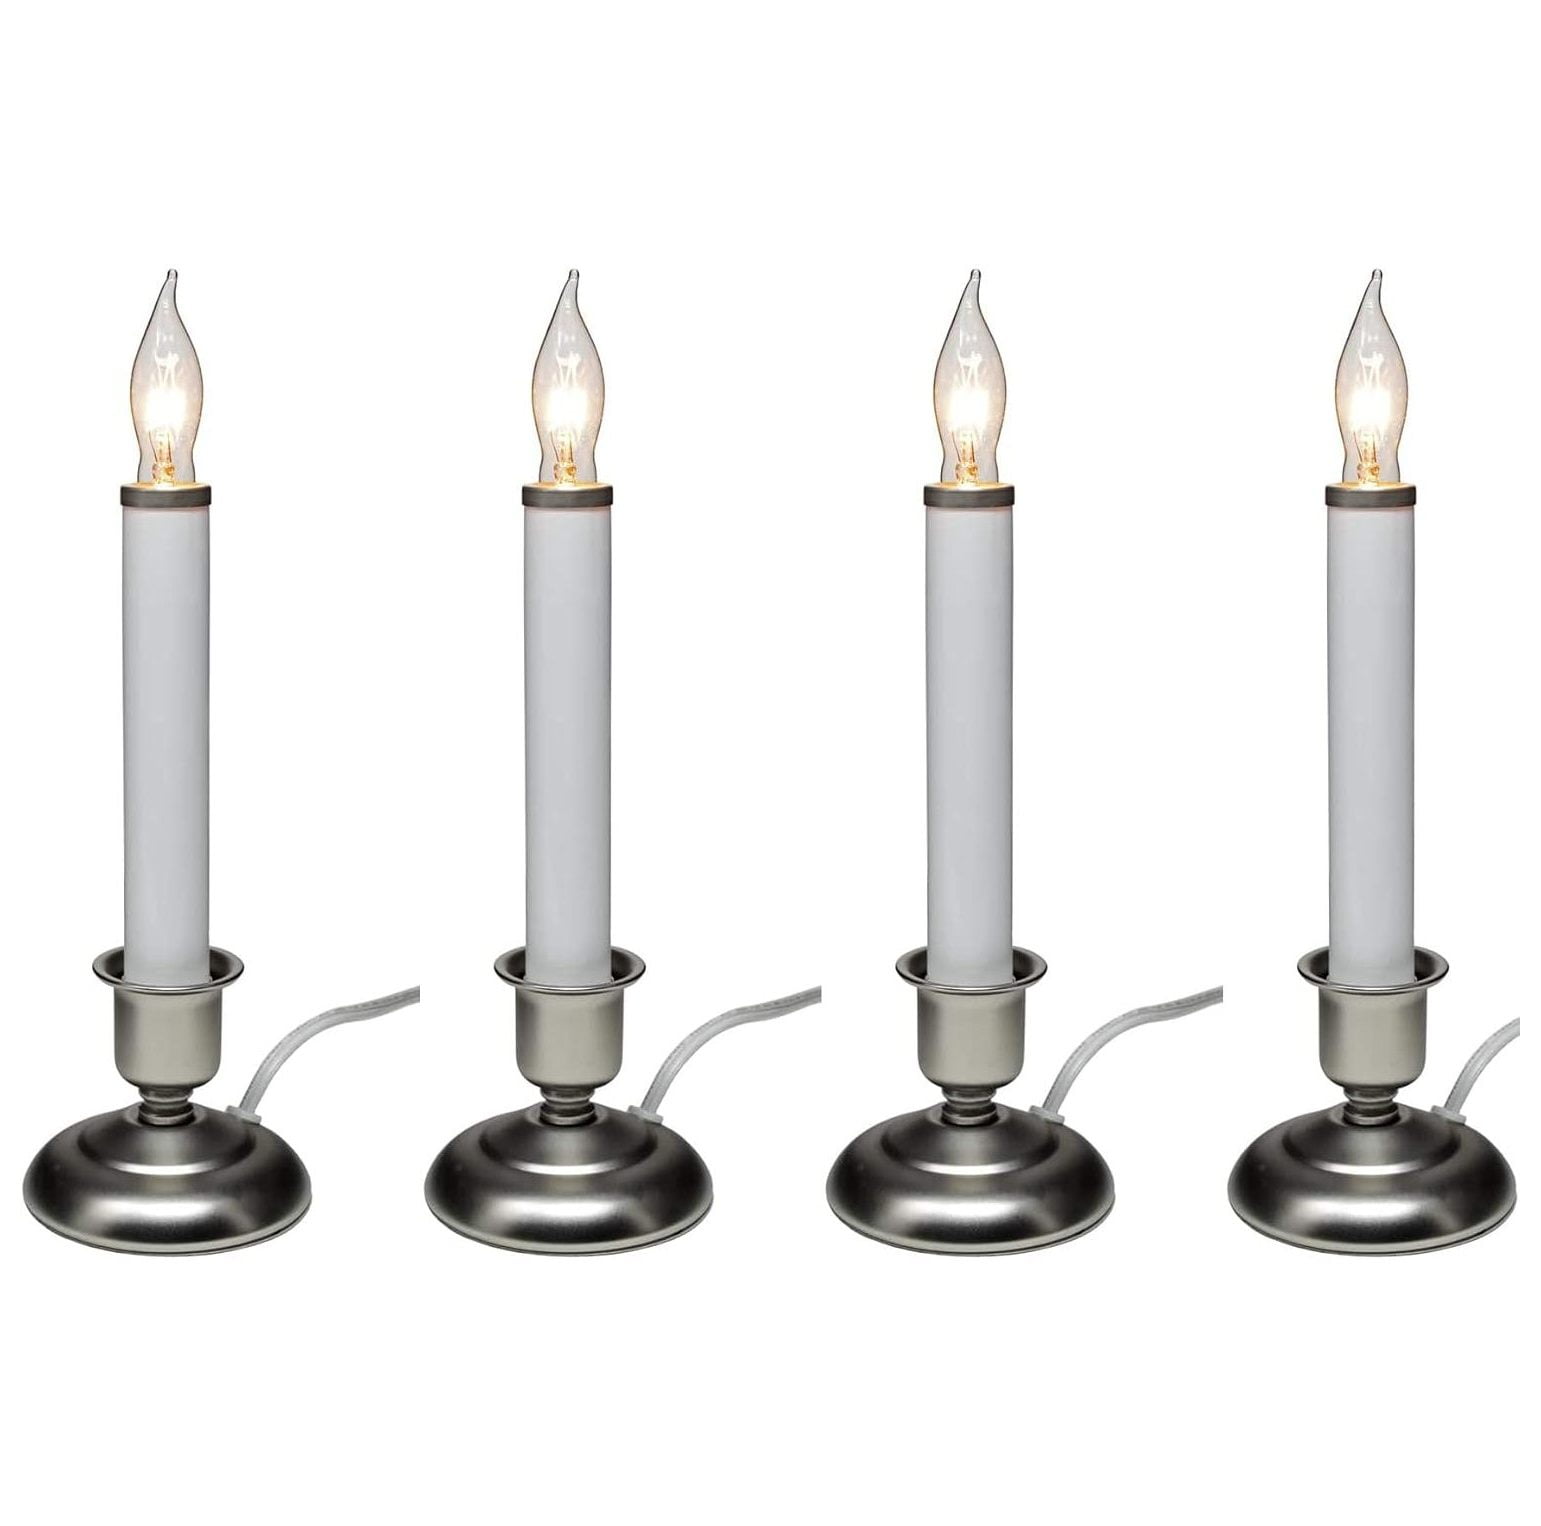 Cross Forge Electric Candle with Steady Lighting, Pewter Finish (Pack of 4)